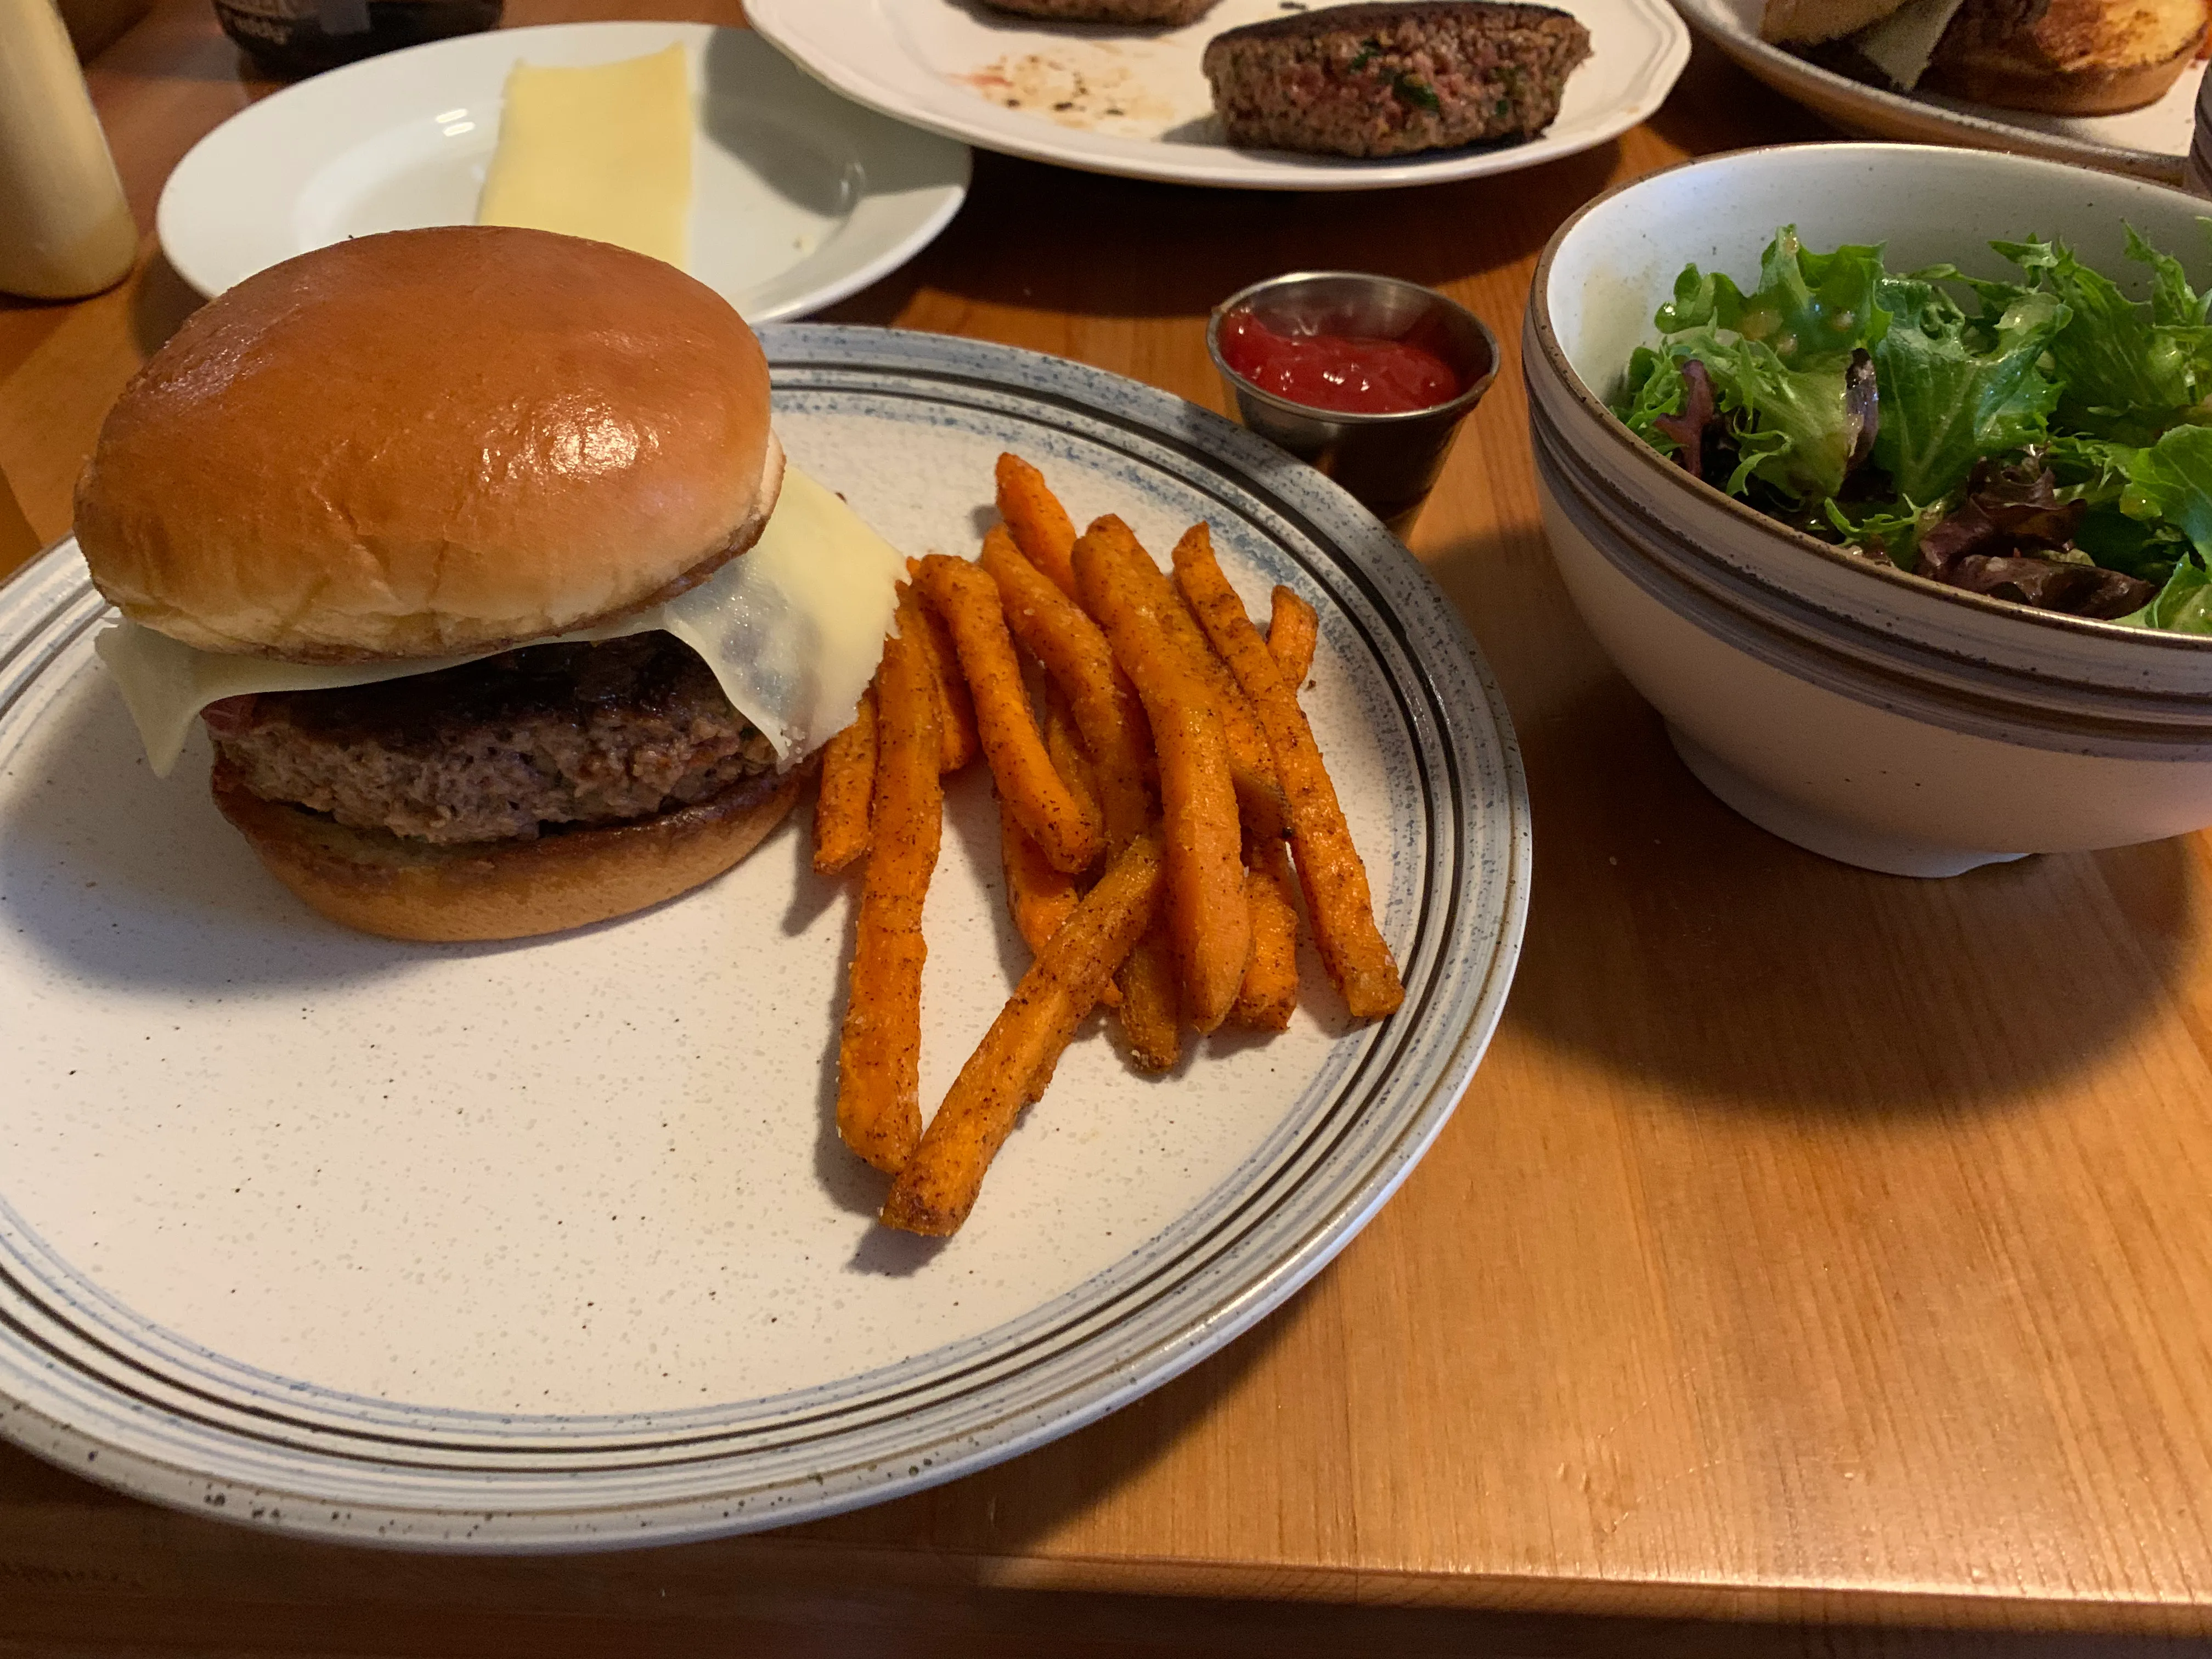 Finished veggie burgers with sweet potato fries and salad